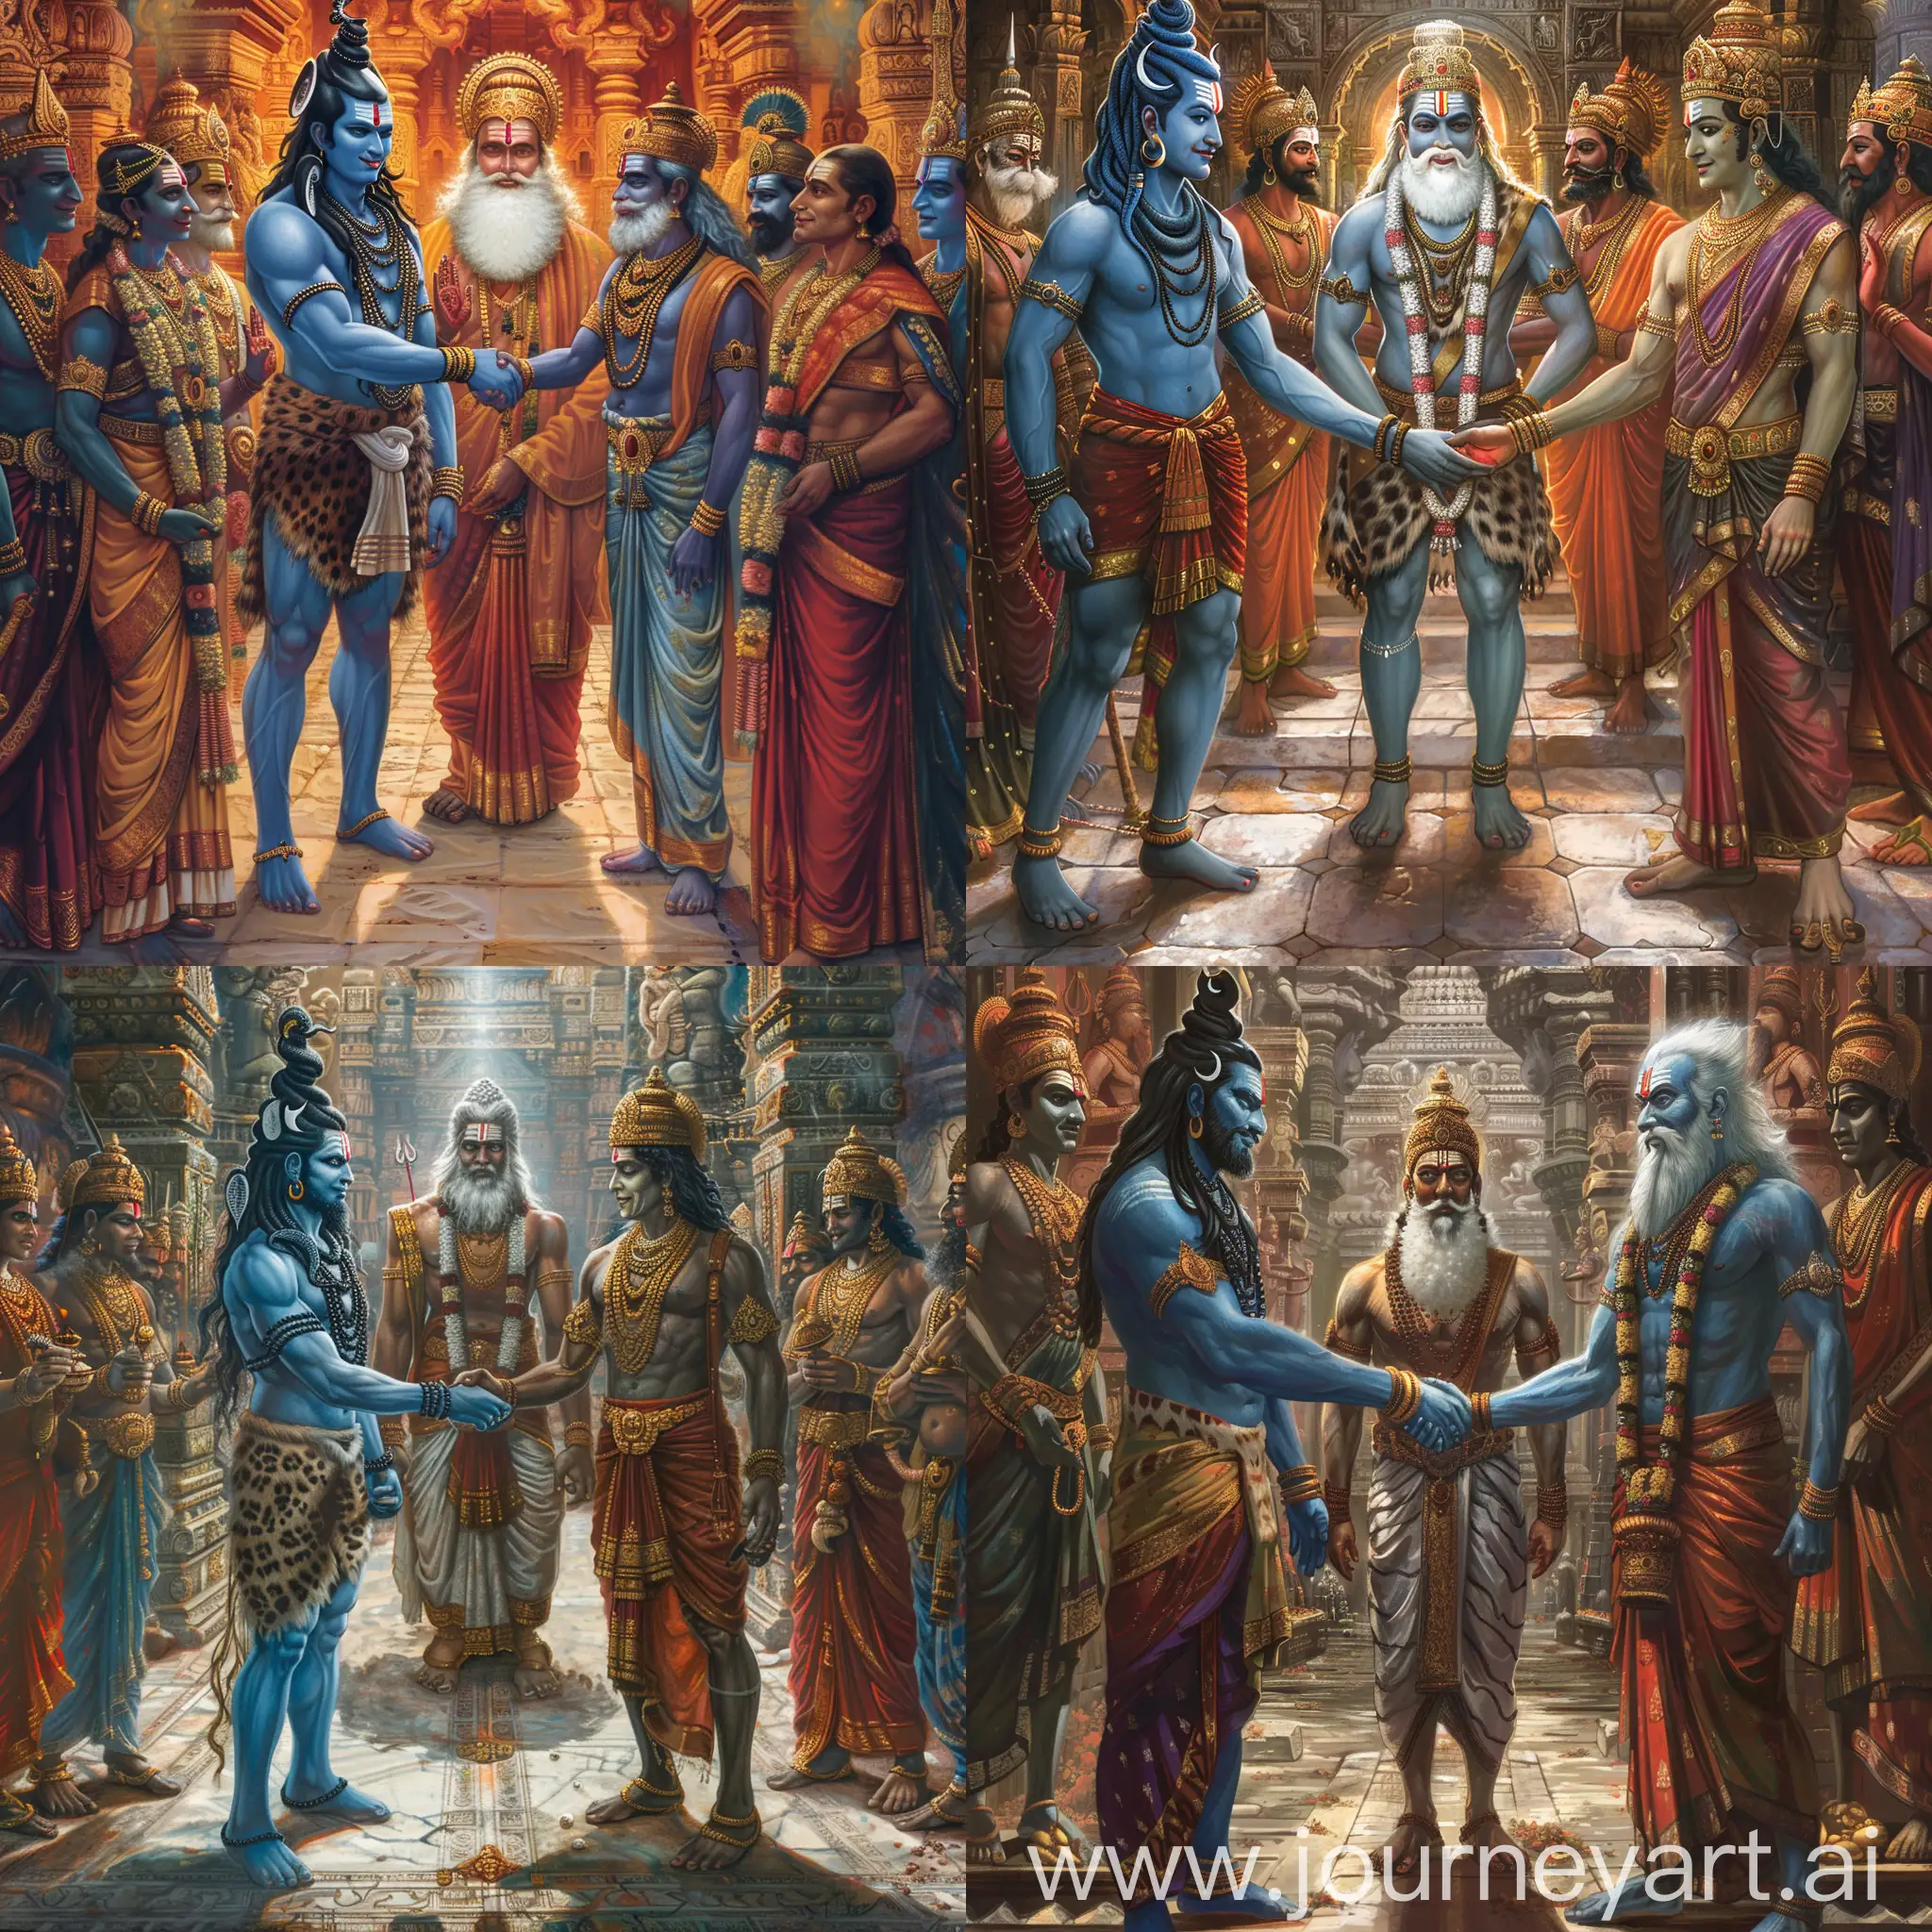 Hindu Gods, Shiva is shaking hand with Vishnu, both are blue skin and don't have beard.

Brahma is in the middle at background. Meanwhile, Brahma has white beard.

Inside an ancient splendid Hindu temple. Other Hindu gods such as Ganesha, Hanuman, Indra, Agni on two sides..